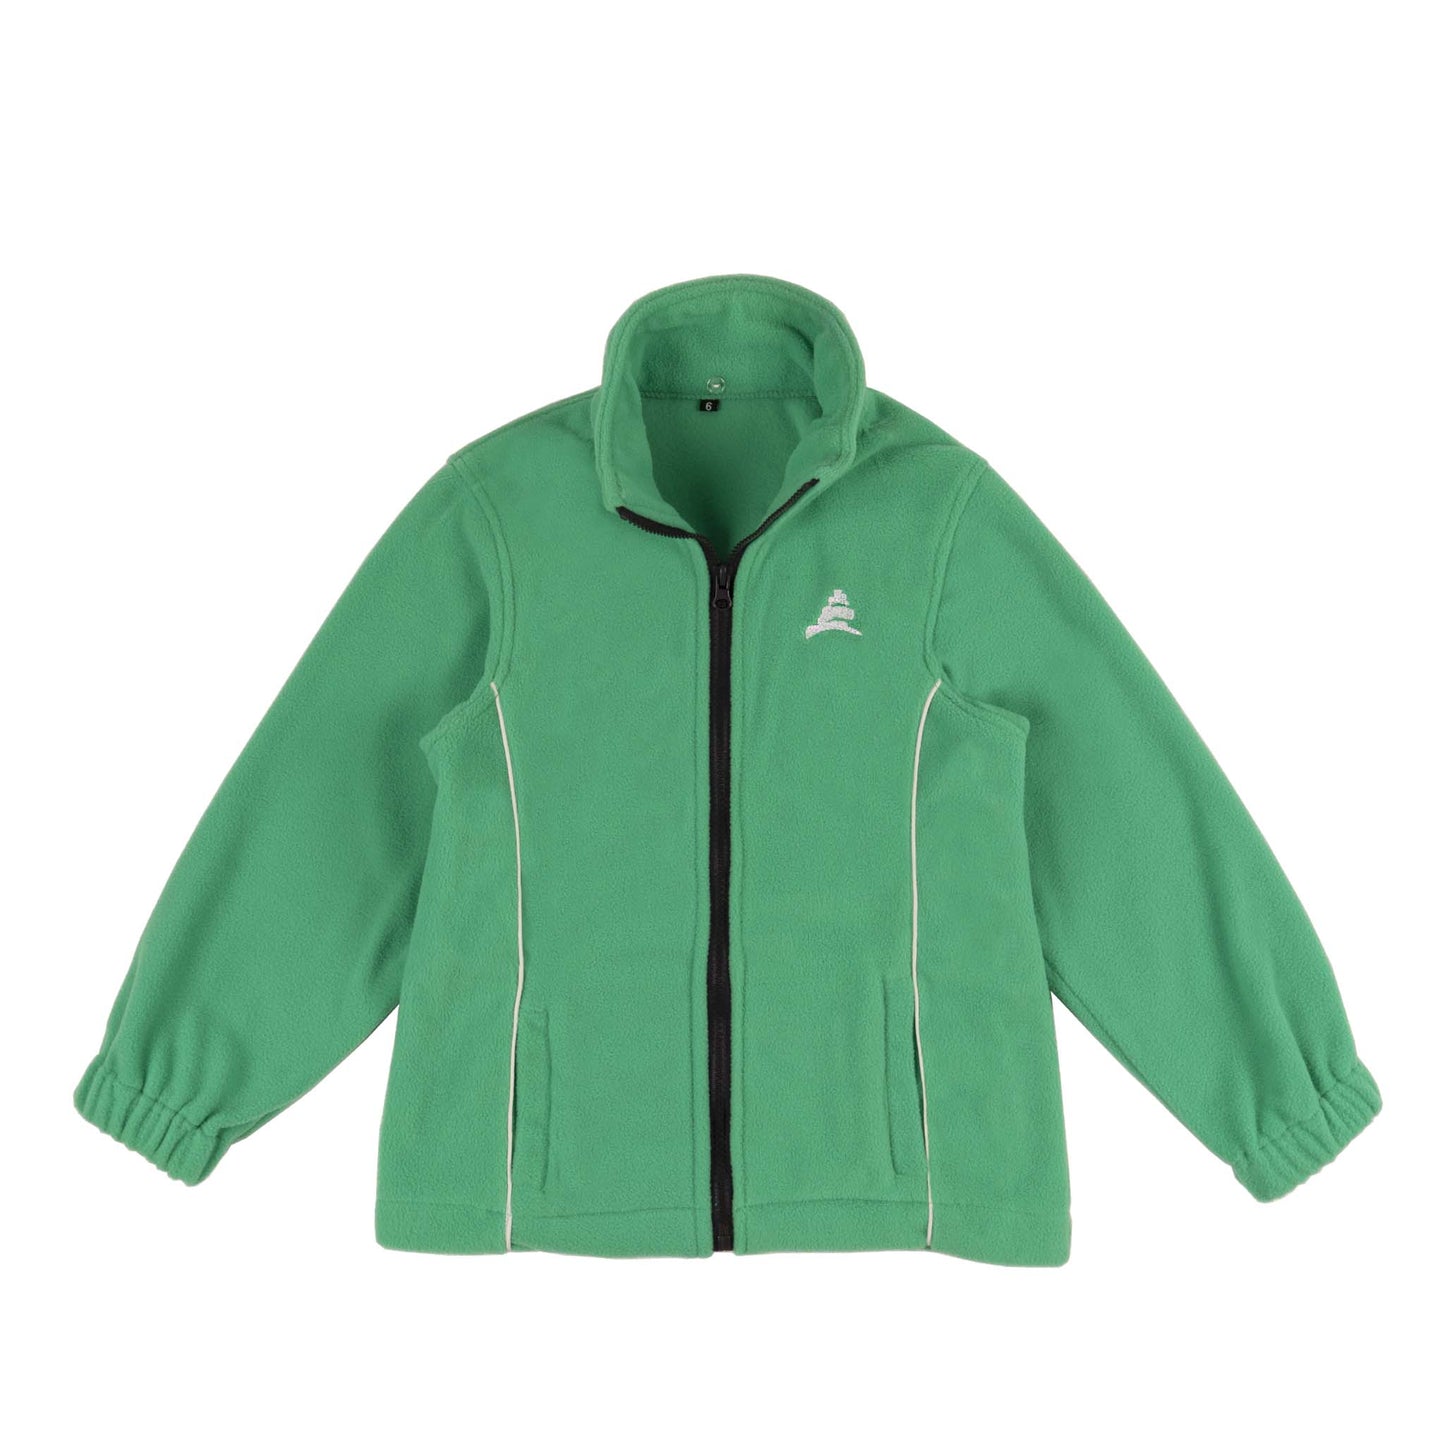 Green Check Boys 3-in-1 Jacket